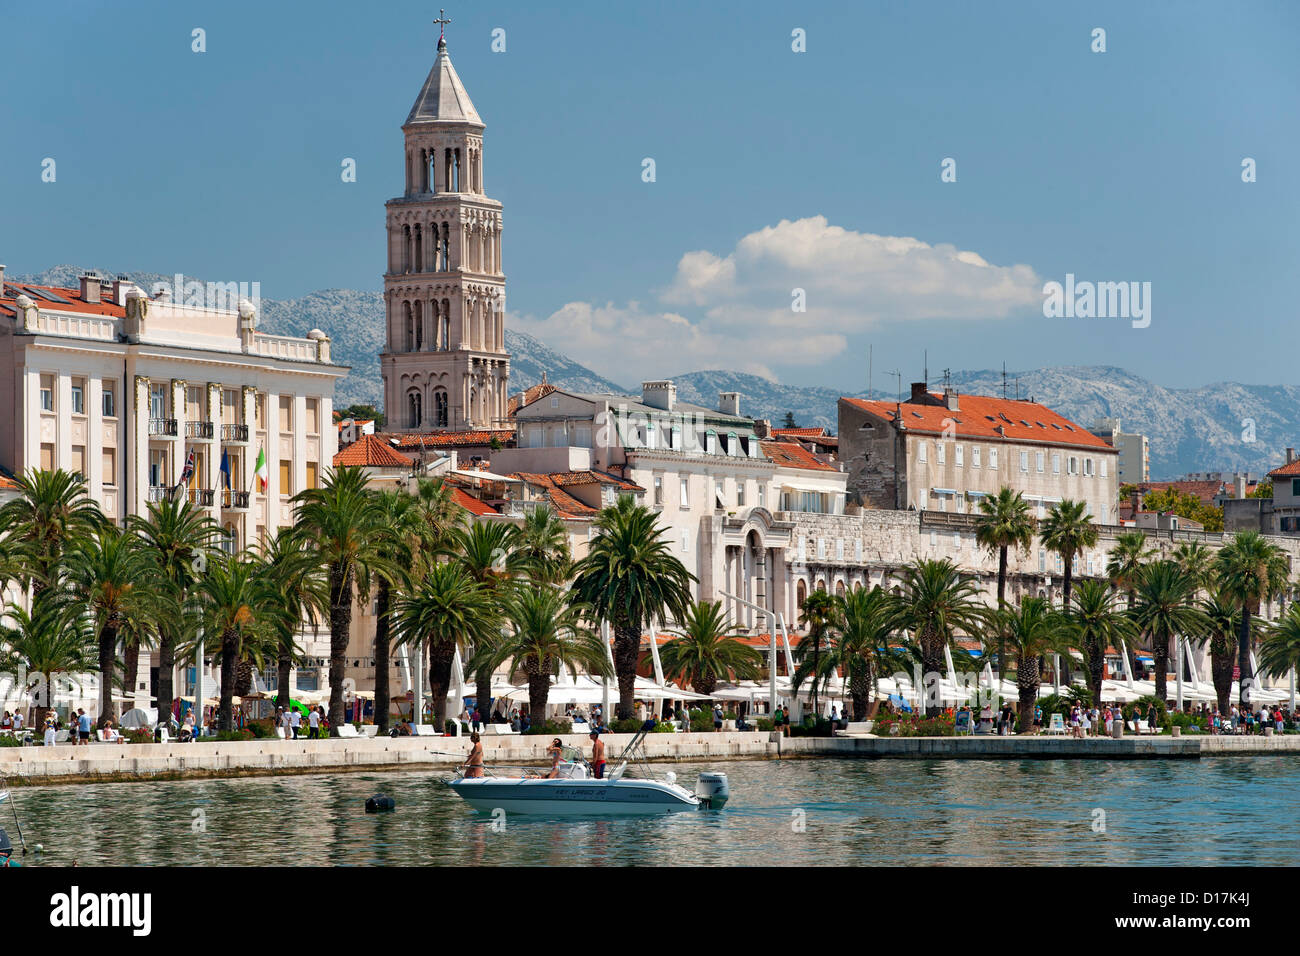 The waterfront promenade and tower of the Cathedral of Saint Domnius in the city of Split in Croatia. Stock Photo